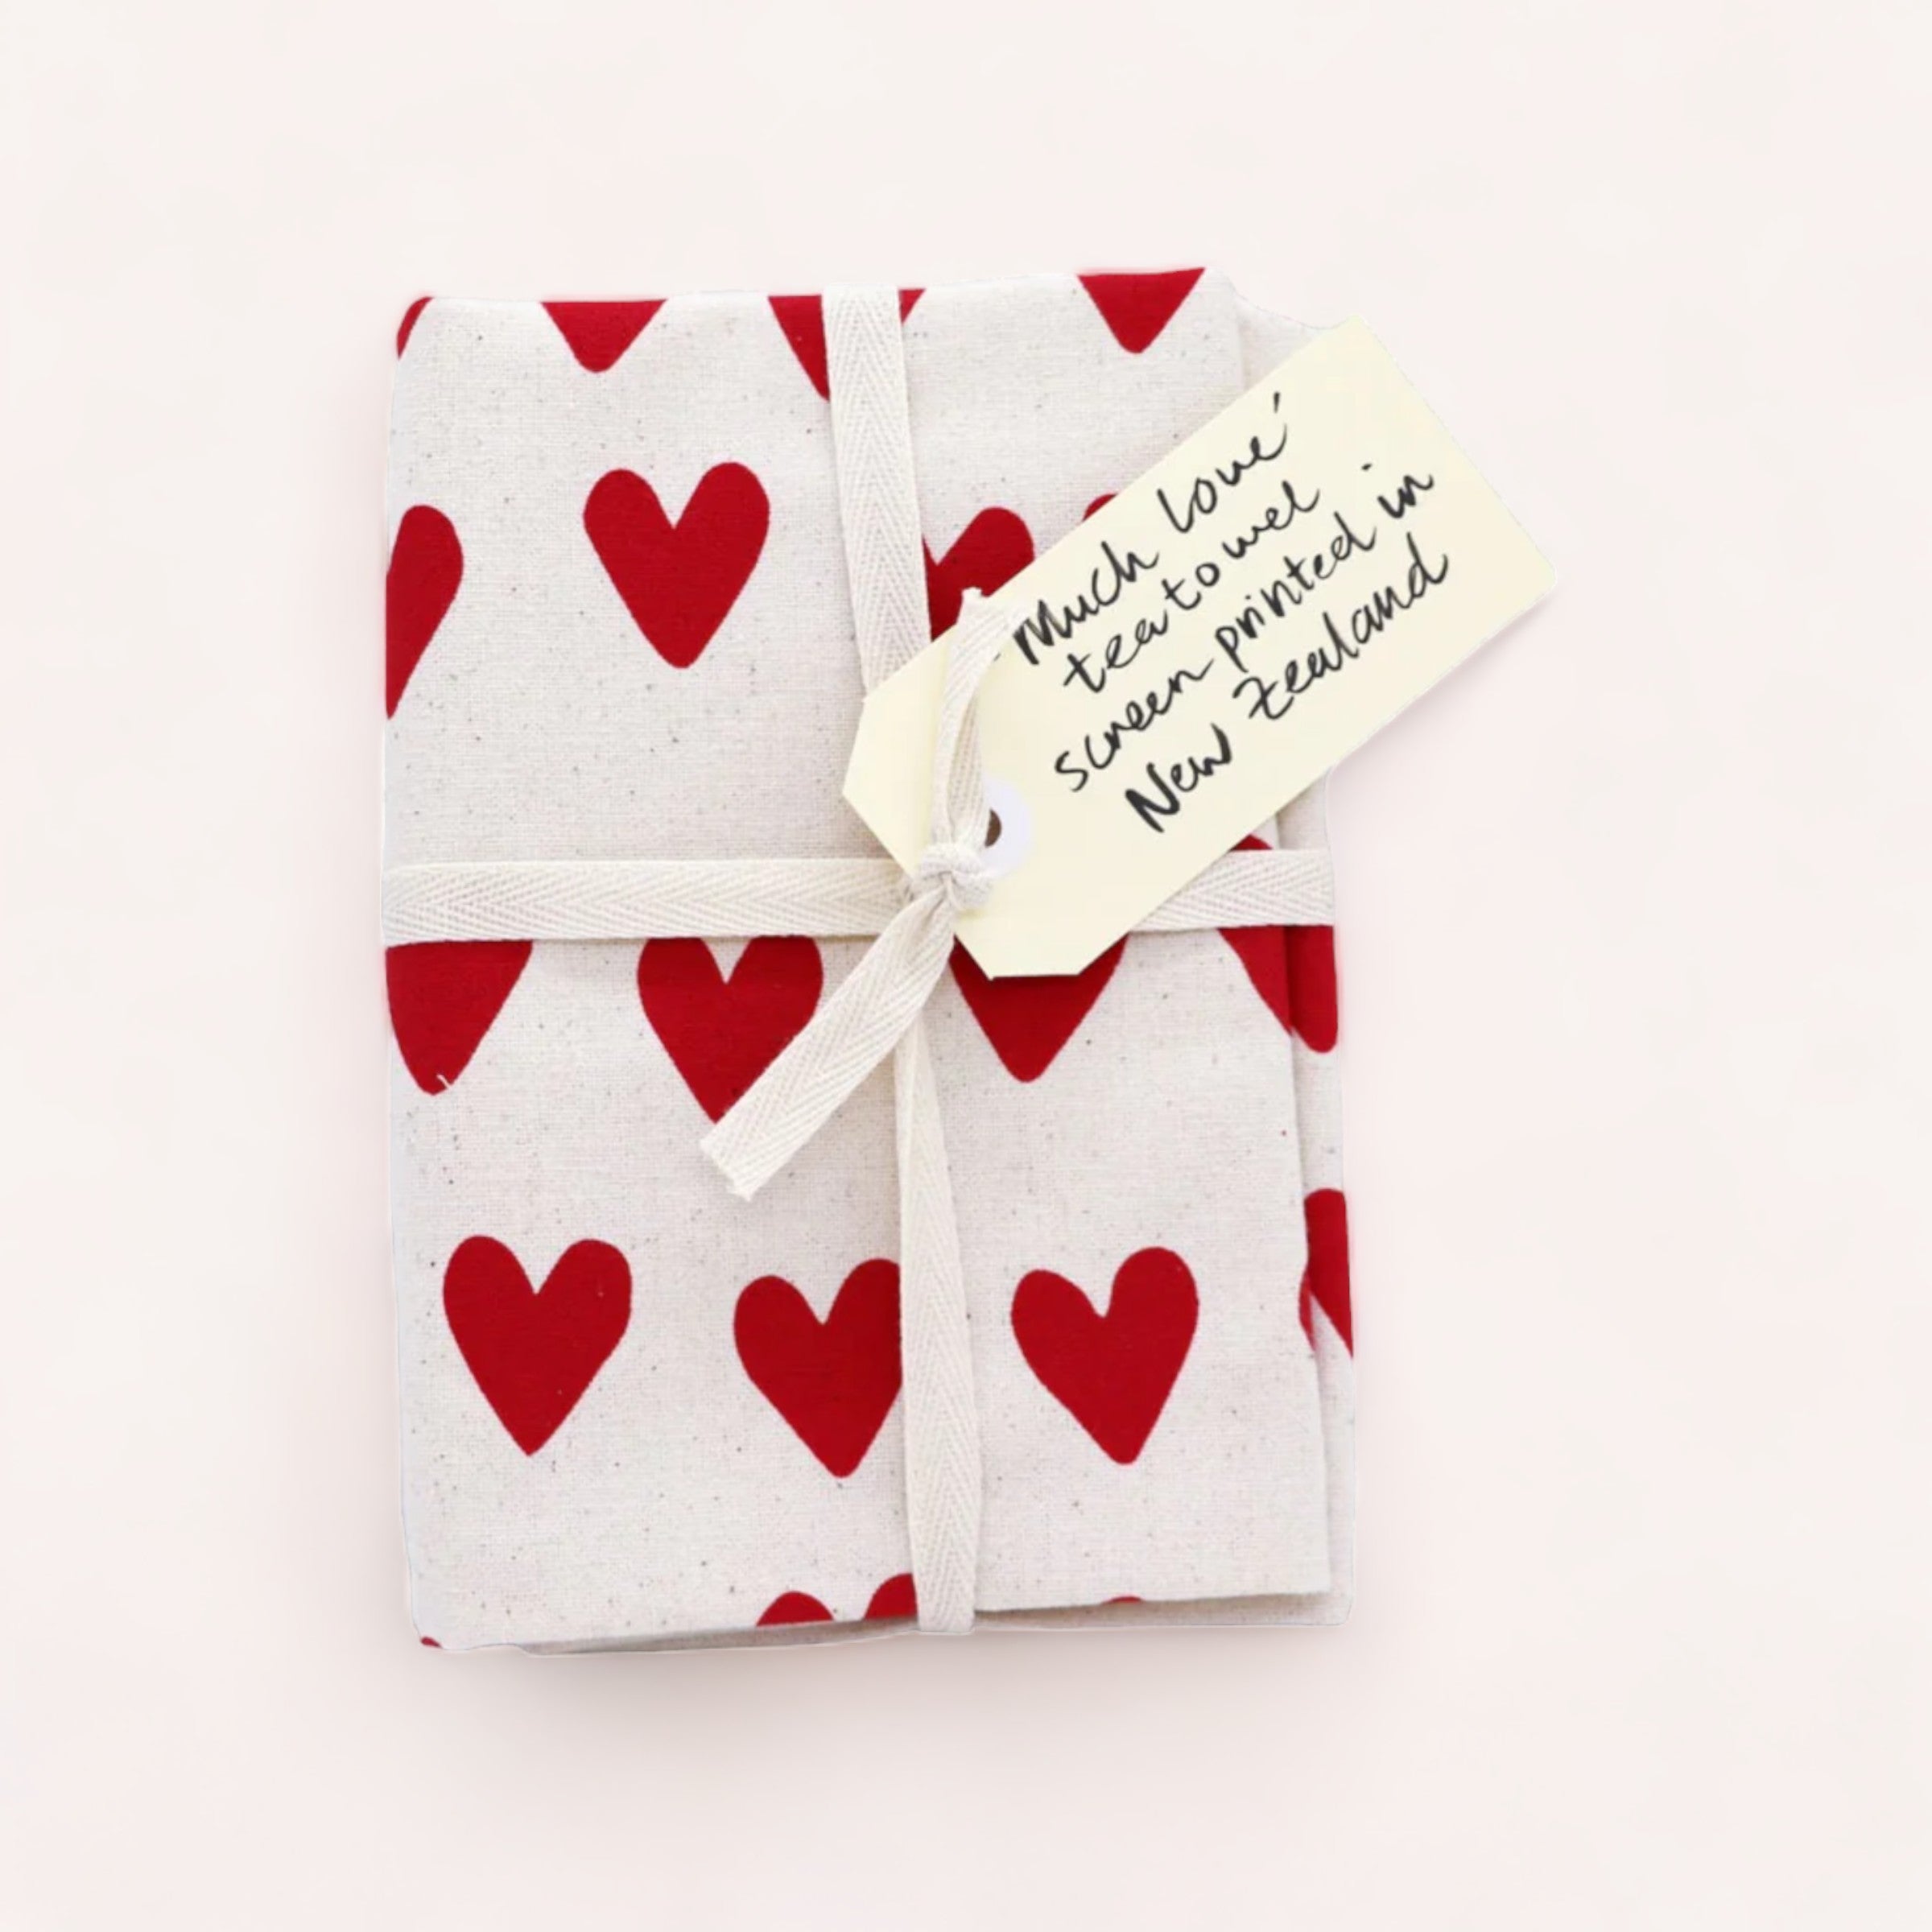 A gift wrapped in heart-patterned paper tied with a white ribbon, accompanied by a handwritten note on a Much Love Tea Towel from Tuesday Print that says, "thank you. Steaks tasted